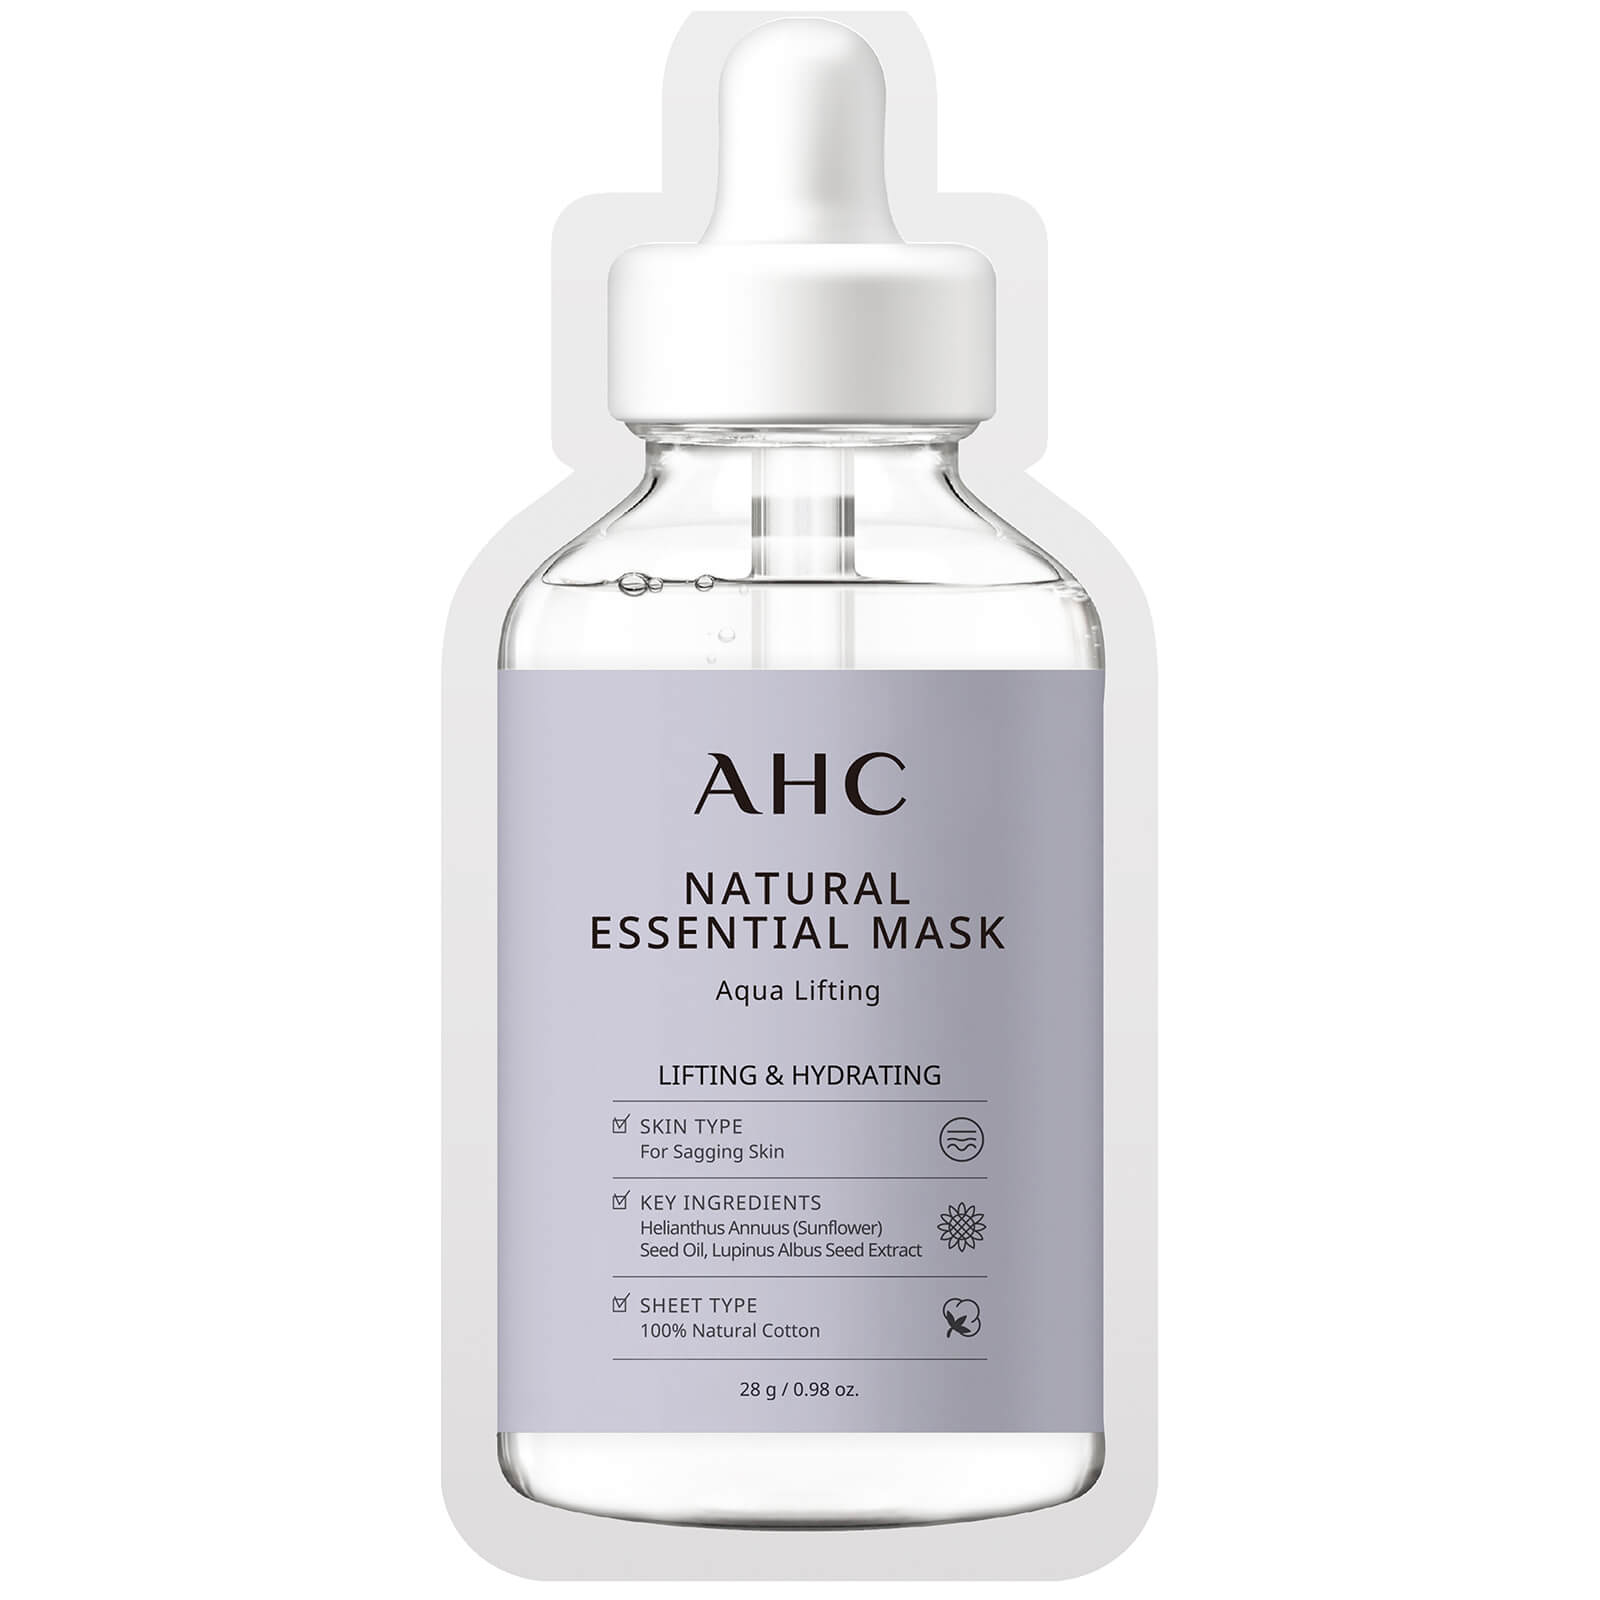 AHC Natural Essential Face Mask Hydrating and Lifting for Tired Skin